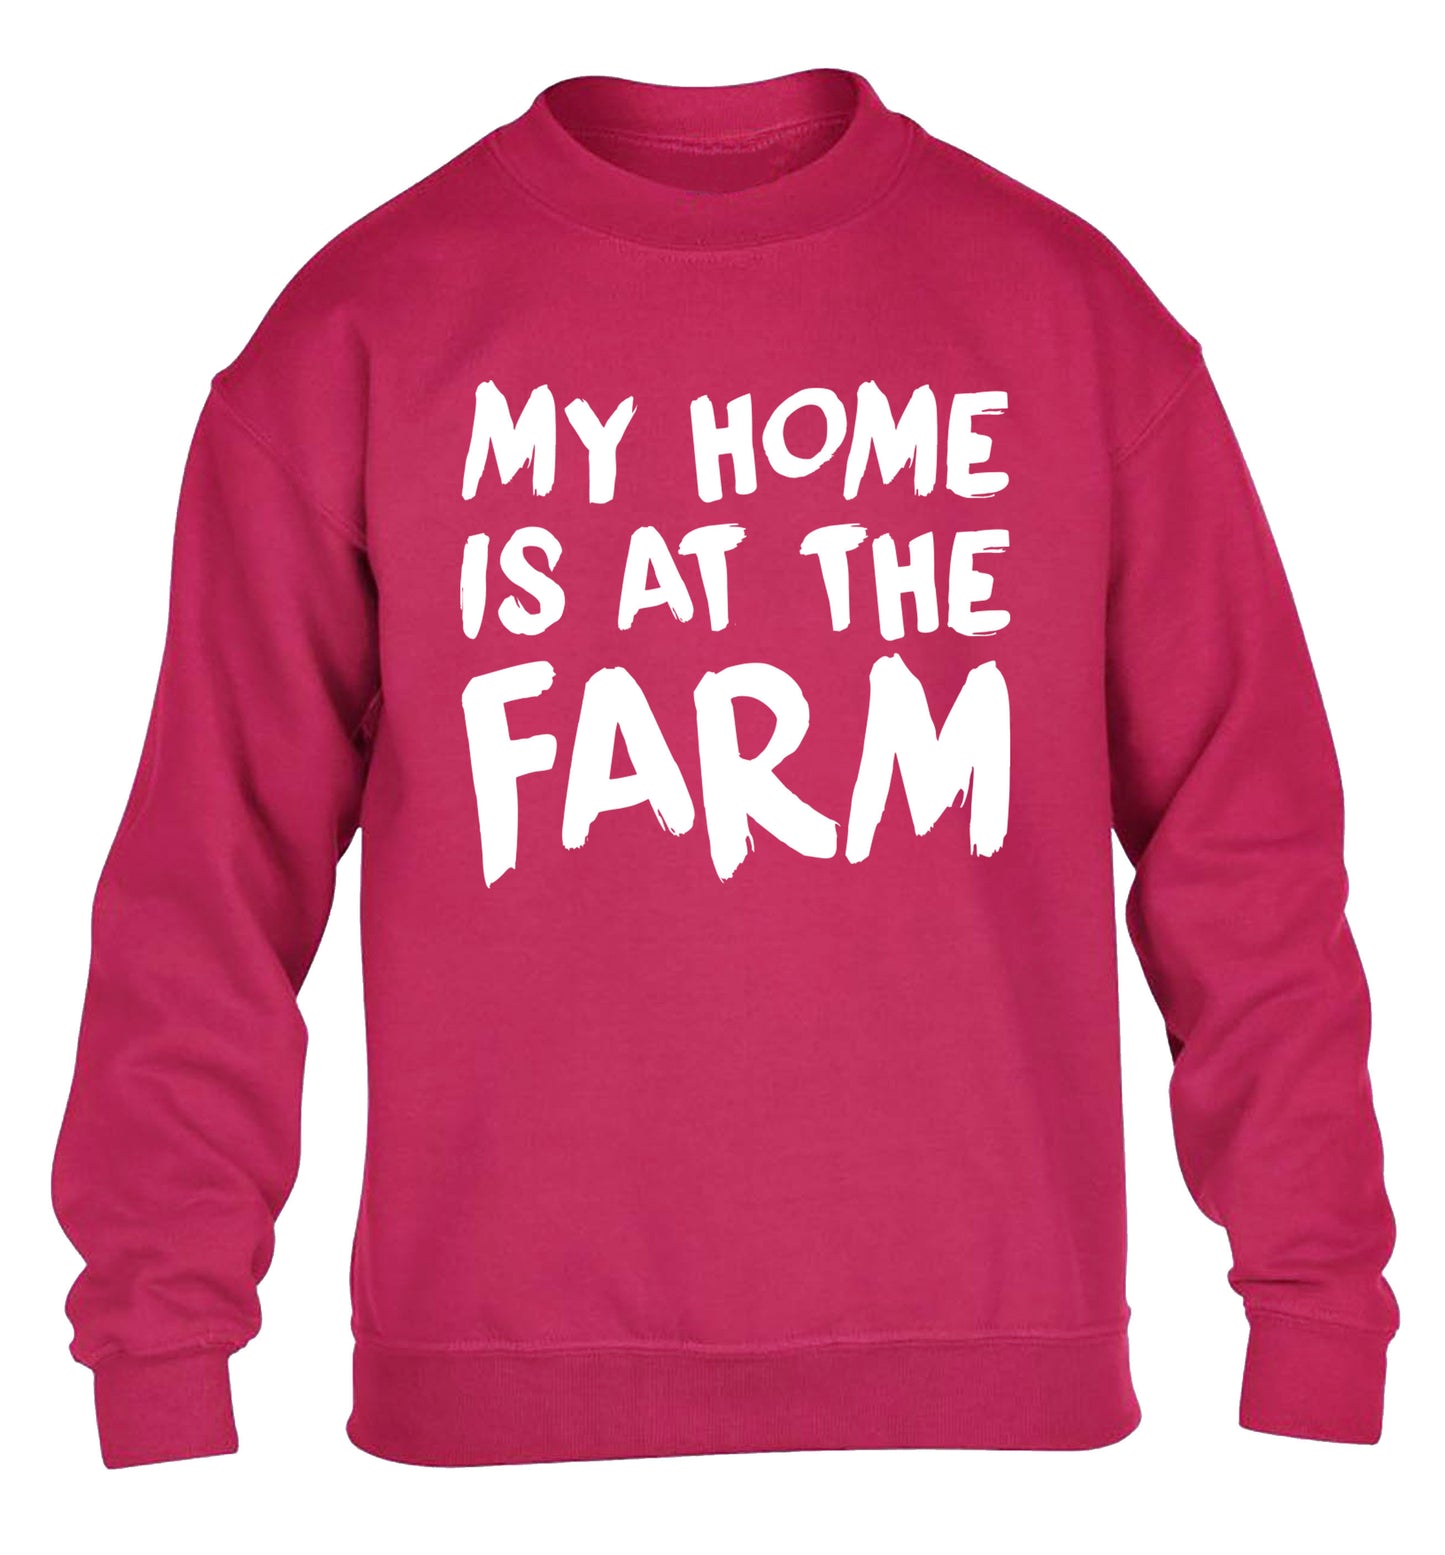 My home is at the farm children's pink sweater 12-14 Years